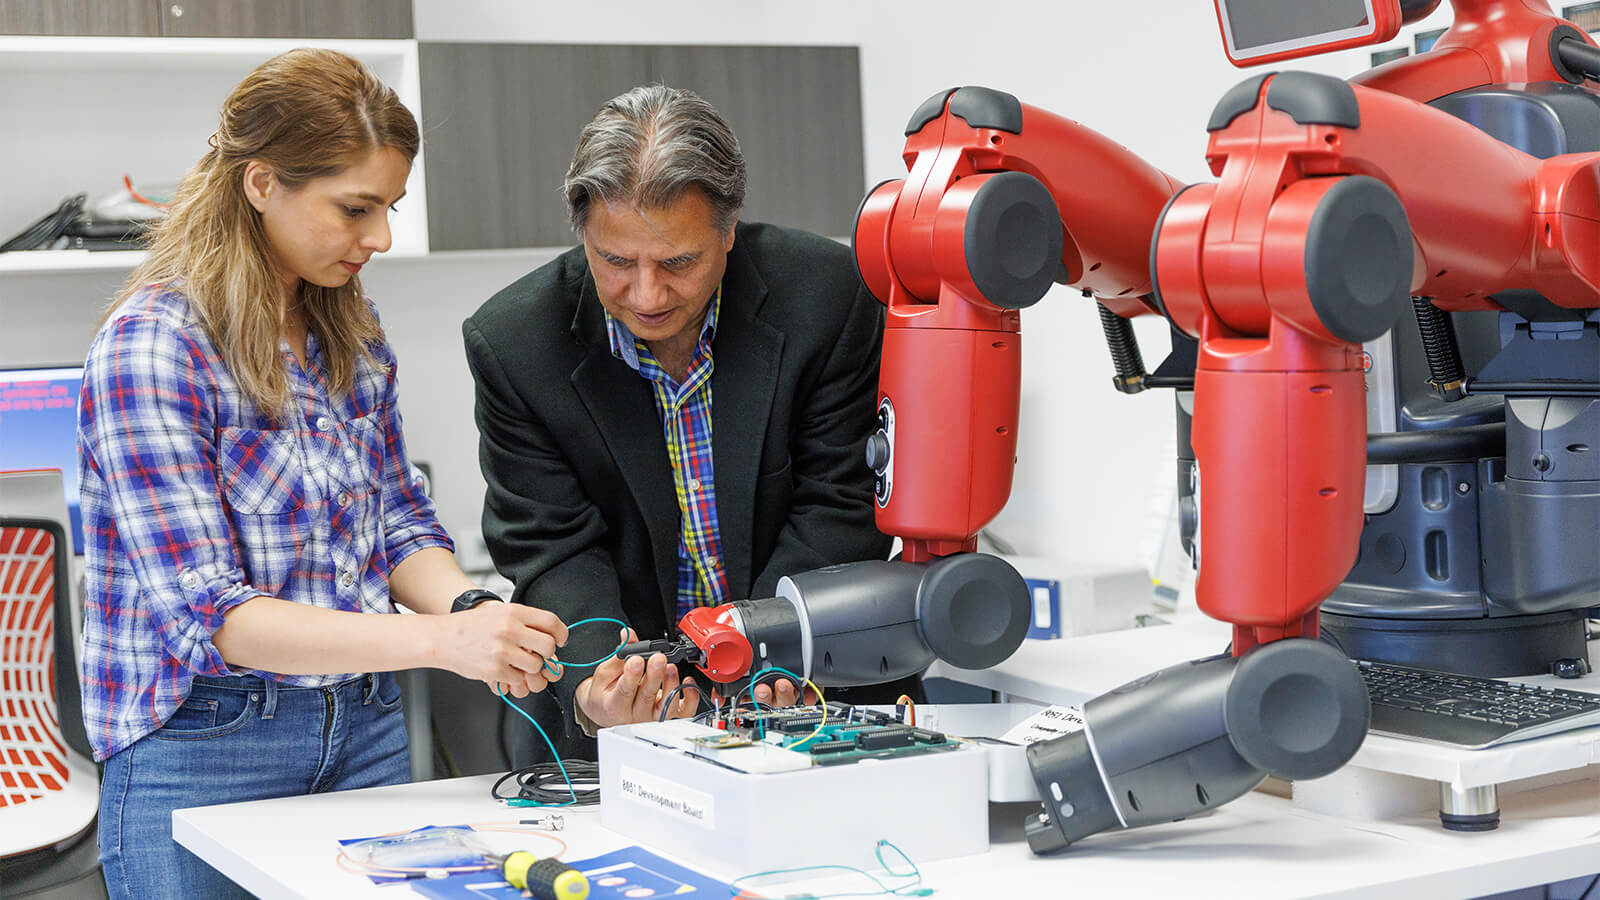 Student and professor work together in robotics lab; with red robotic arms at right.